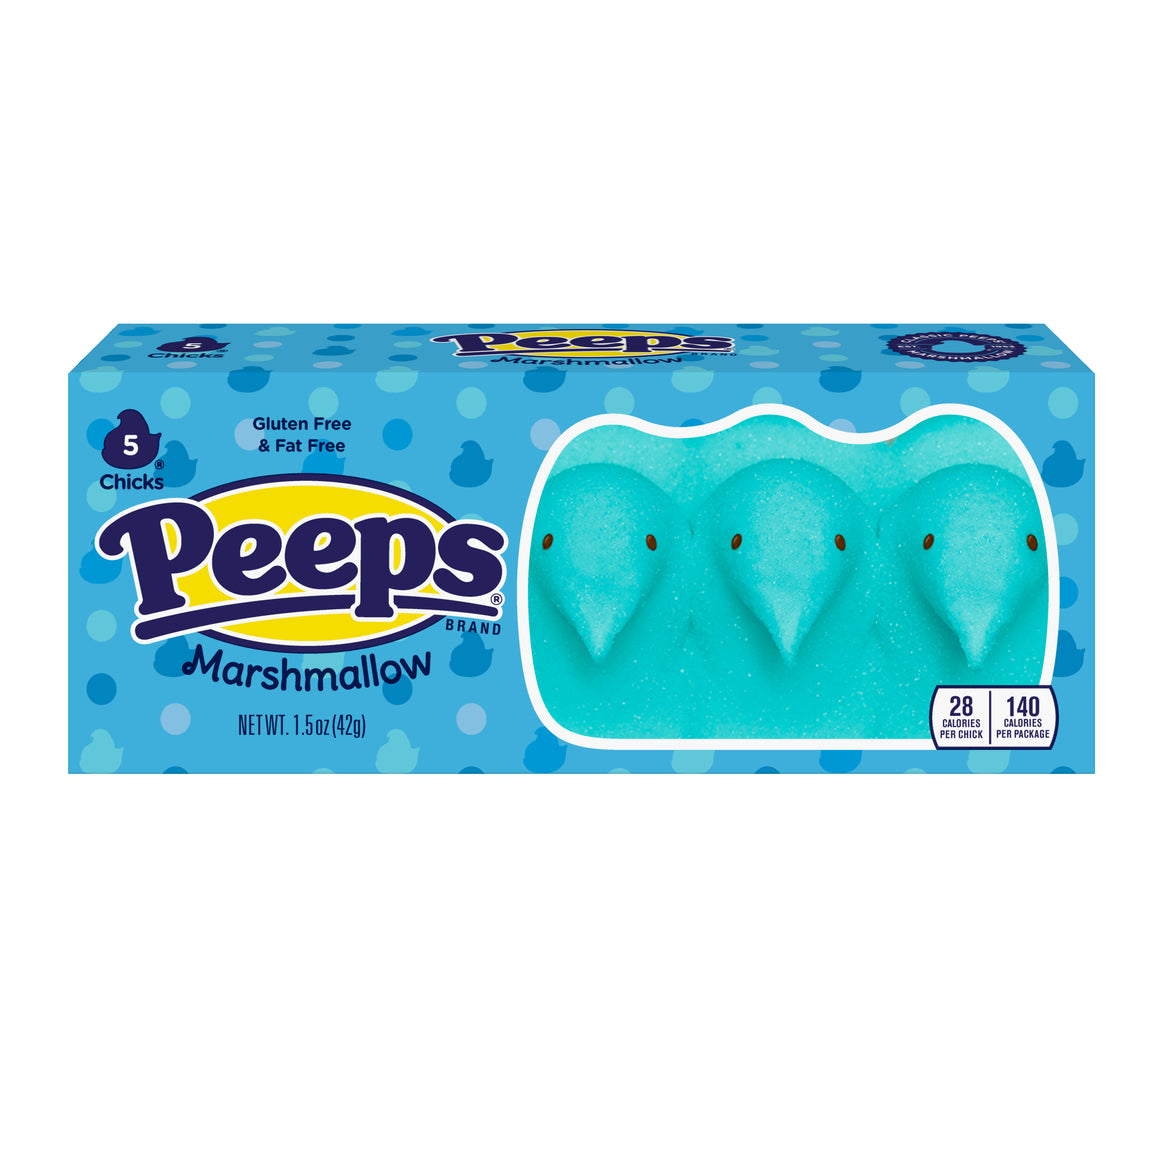 All City Candy Peeps Blue Marshmallow Chicks 10 Pack Easter Just Born Inc For fresh candy and great service, visit www.allcitycandy.com